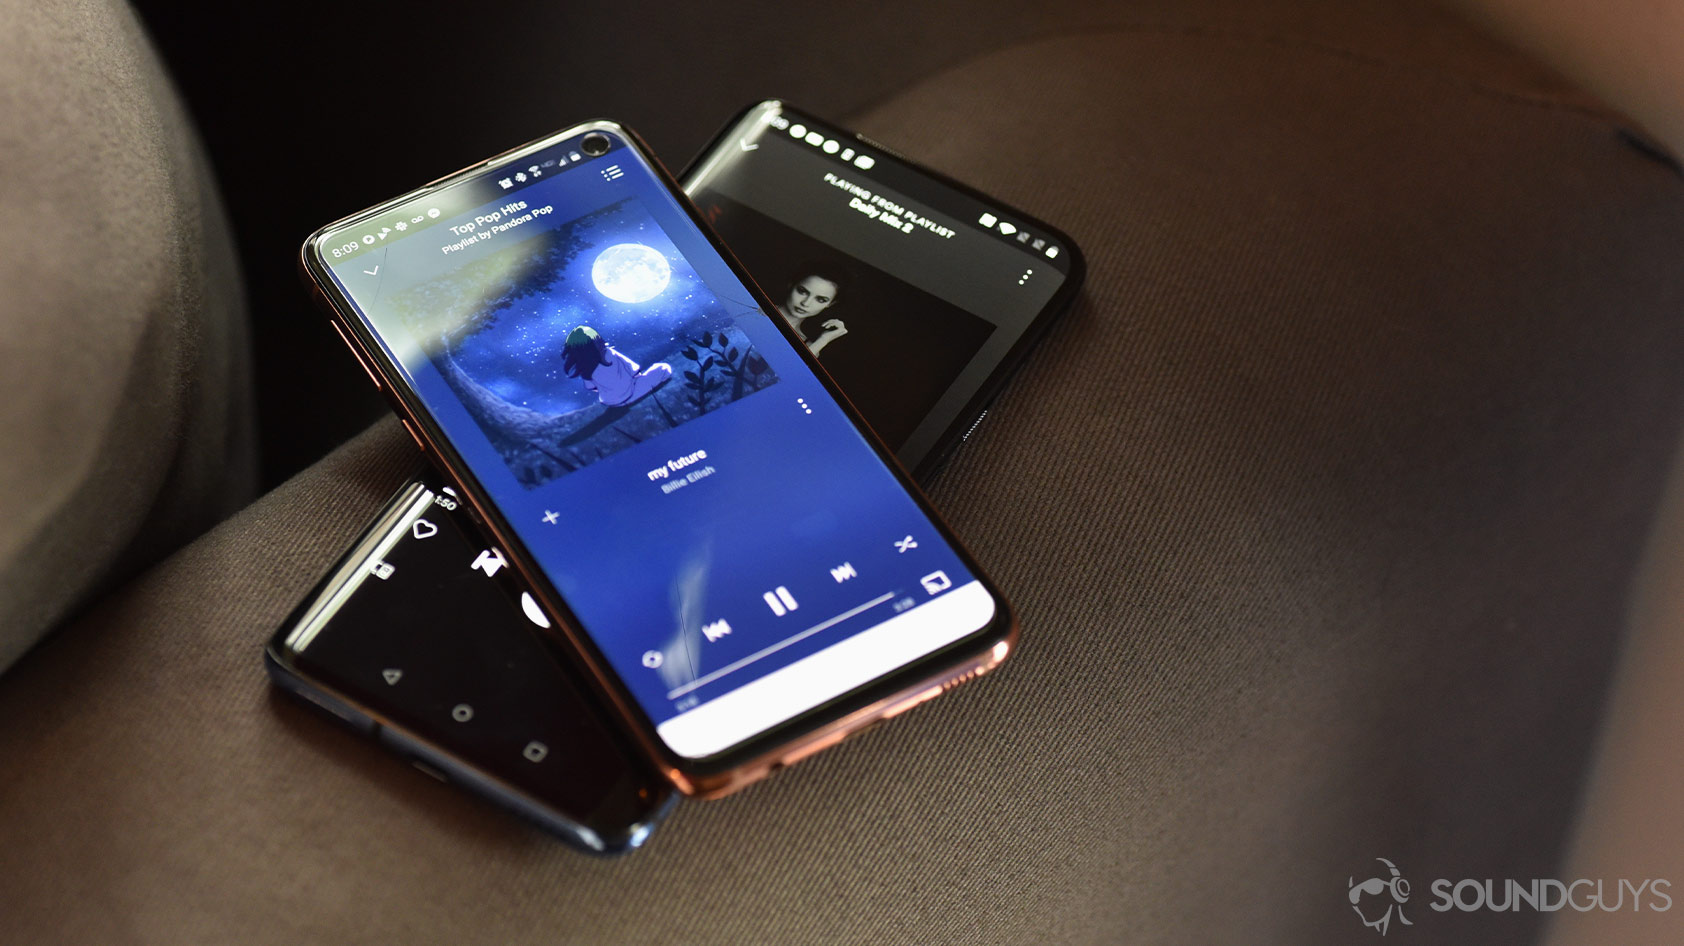 A picture showing Pandora vs Spotify UIs on two smartphones for comparison.